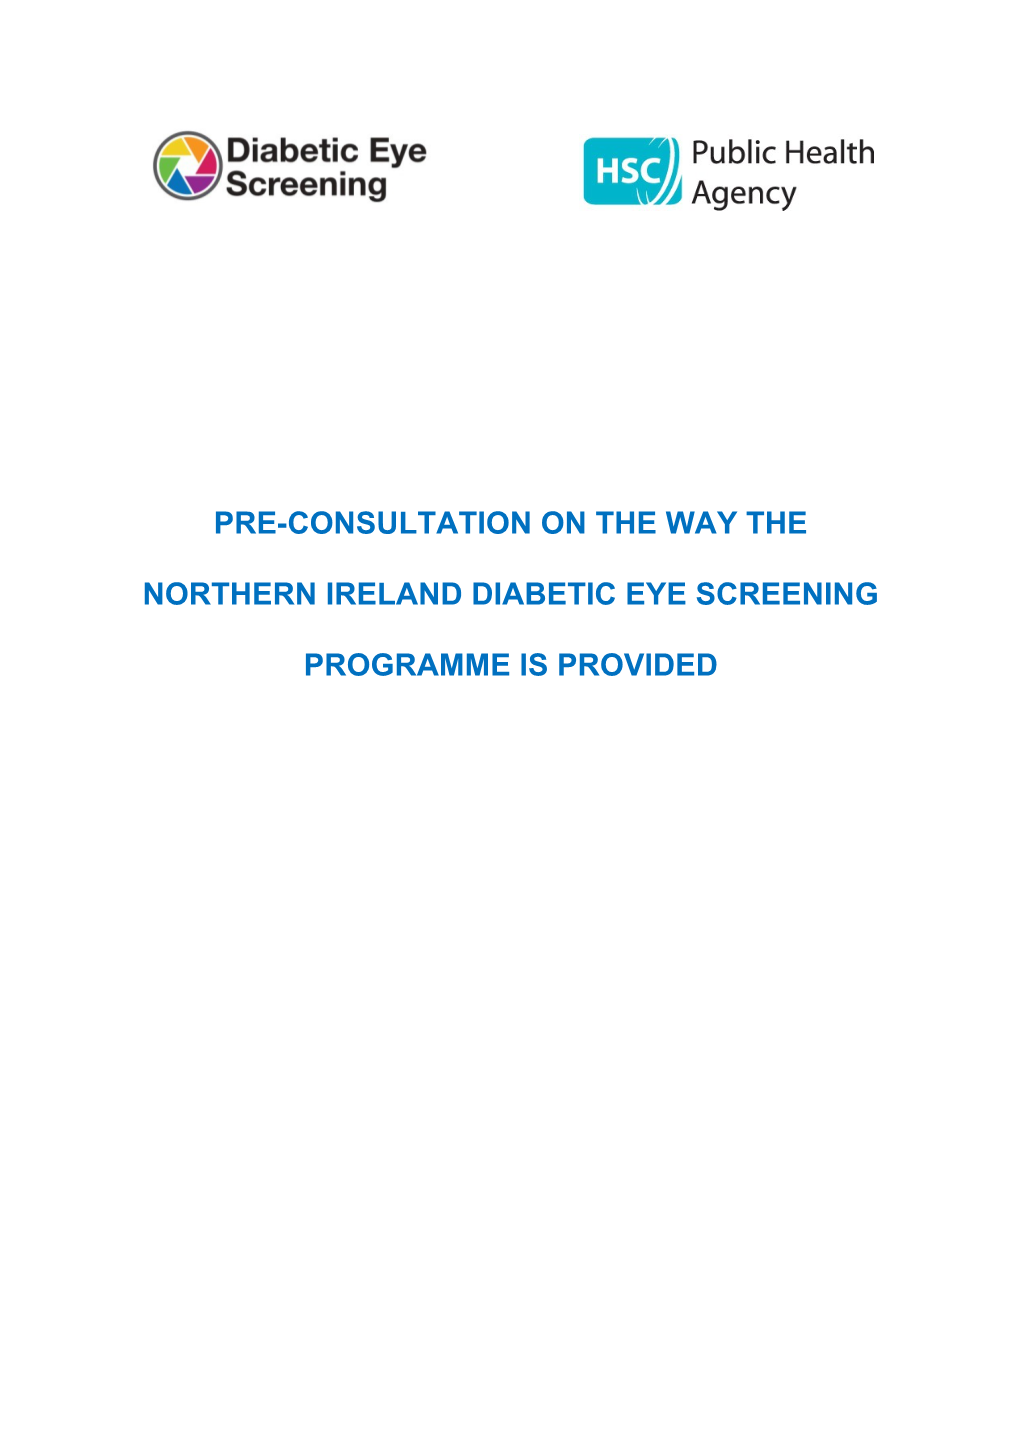 Pre-Consultation on the Way the Northern Ireland Diabetic Eye Screening Programme Is Provided